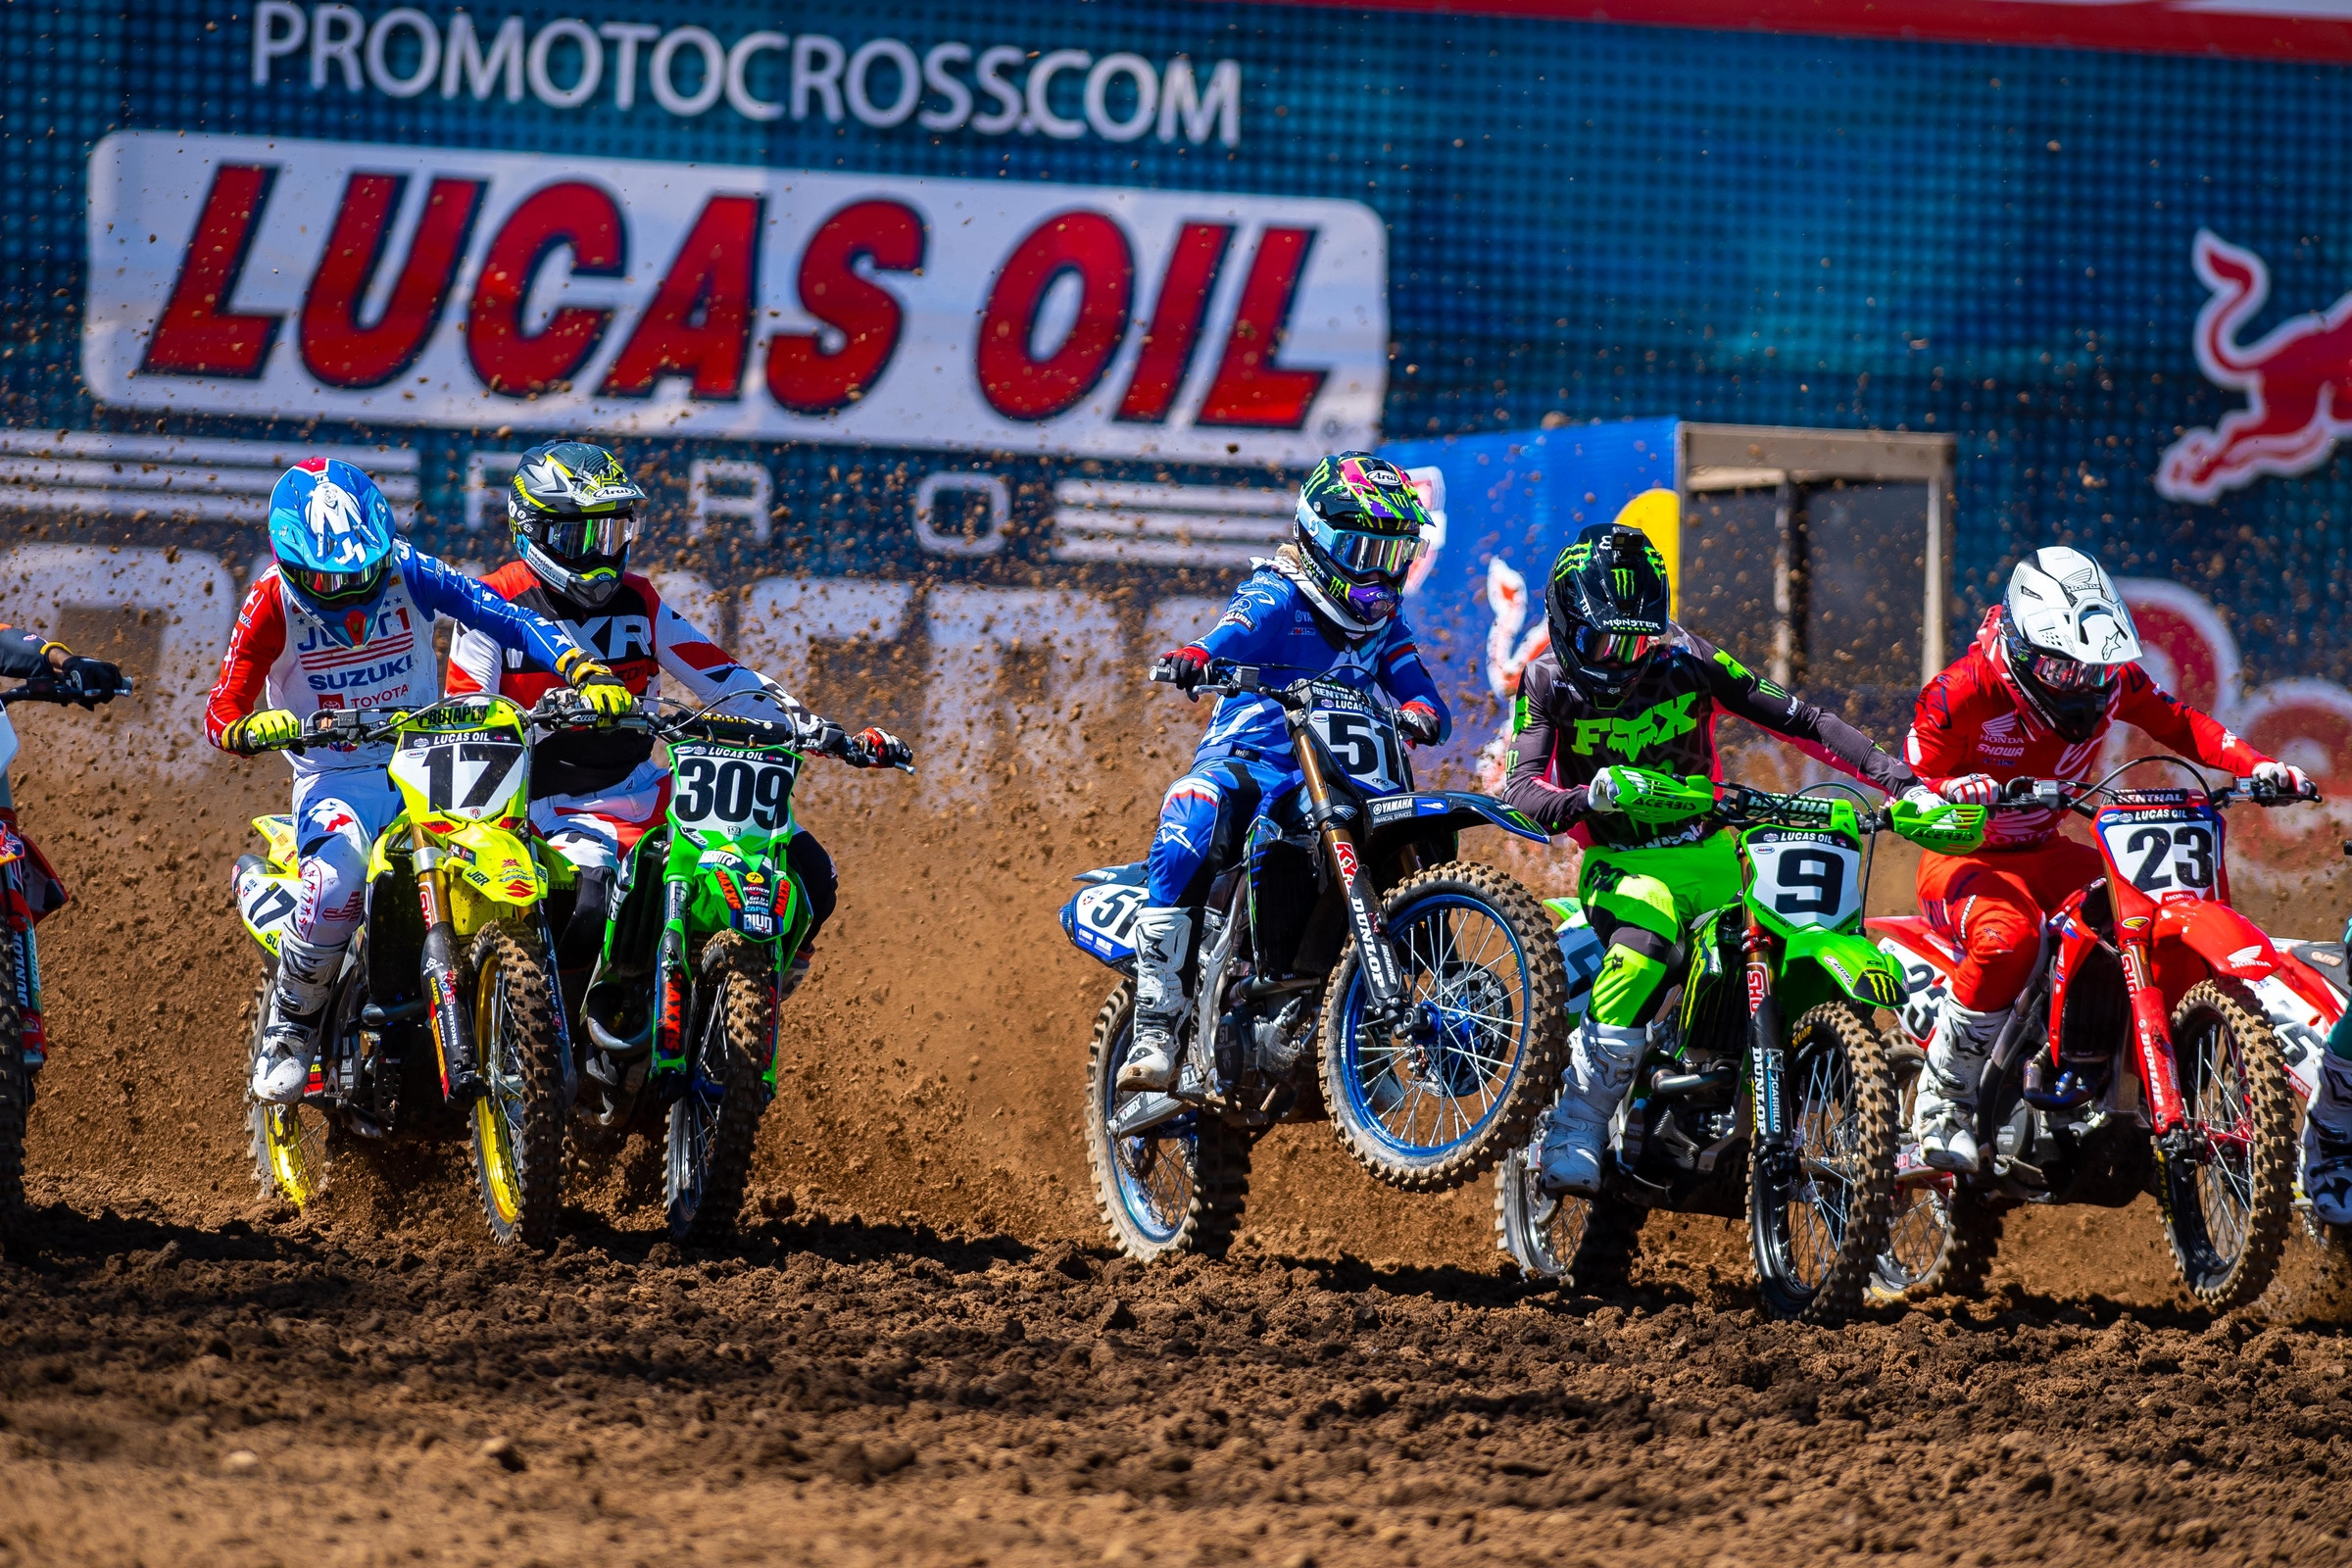 Tickets Now Available for Remaining 2020 Pro Motocross Rounds